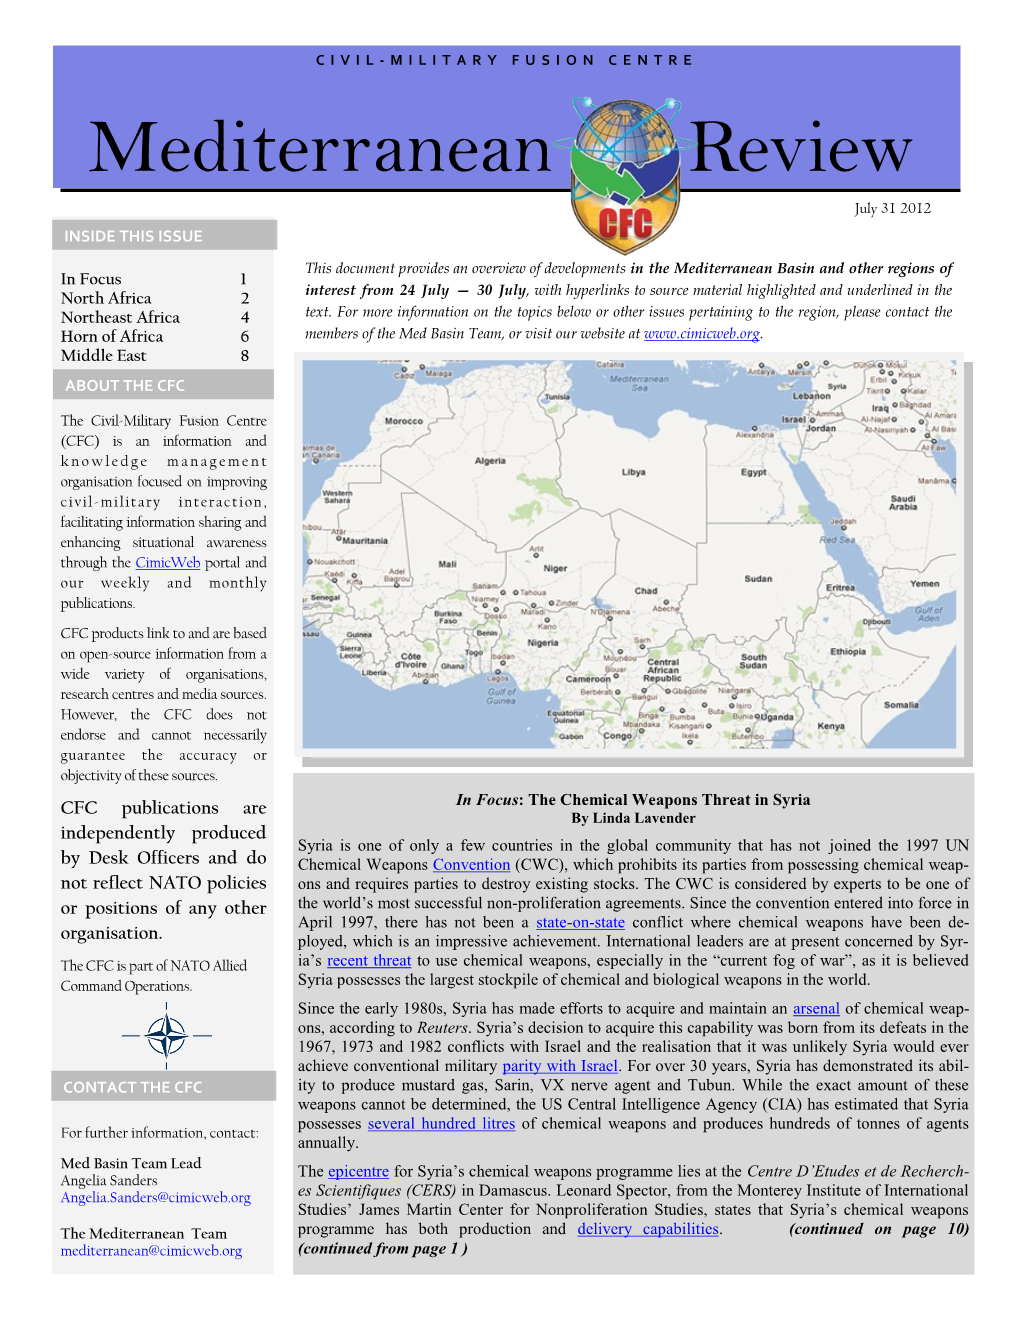 Mediterranean Review July 31 2012 INSIDE THIS ISSUE